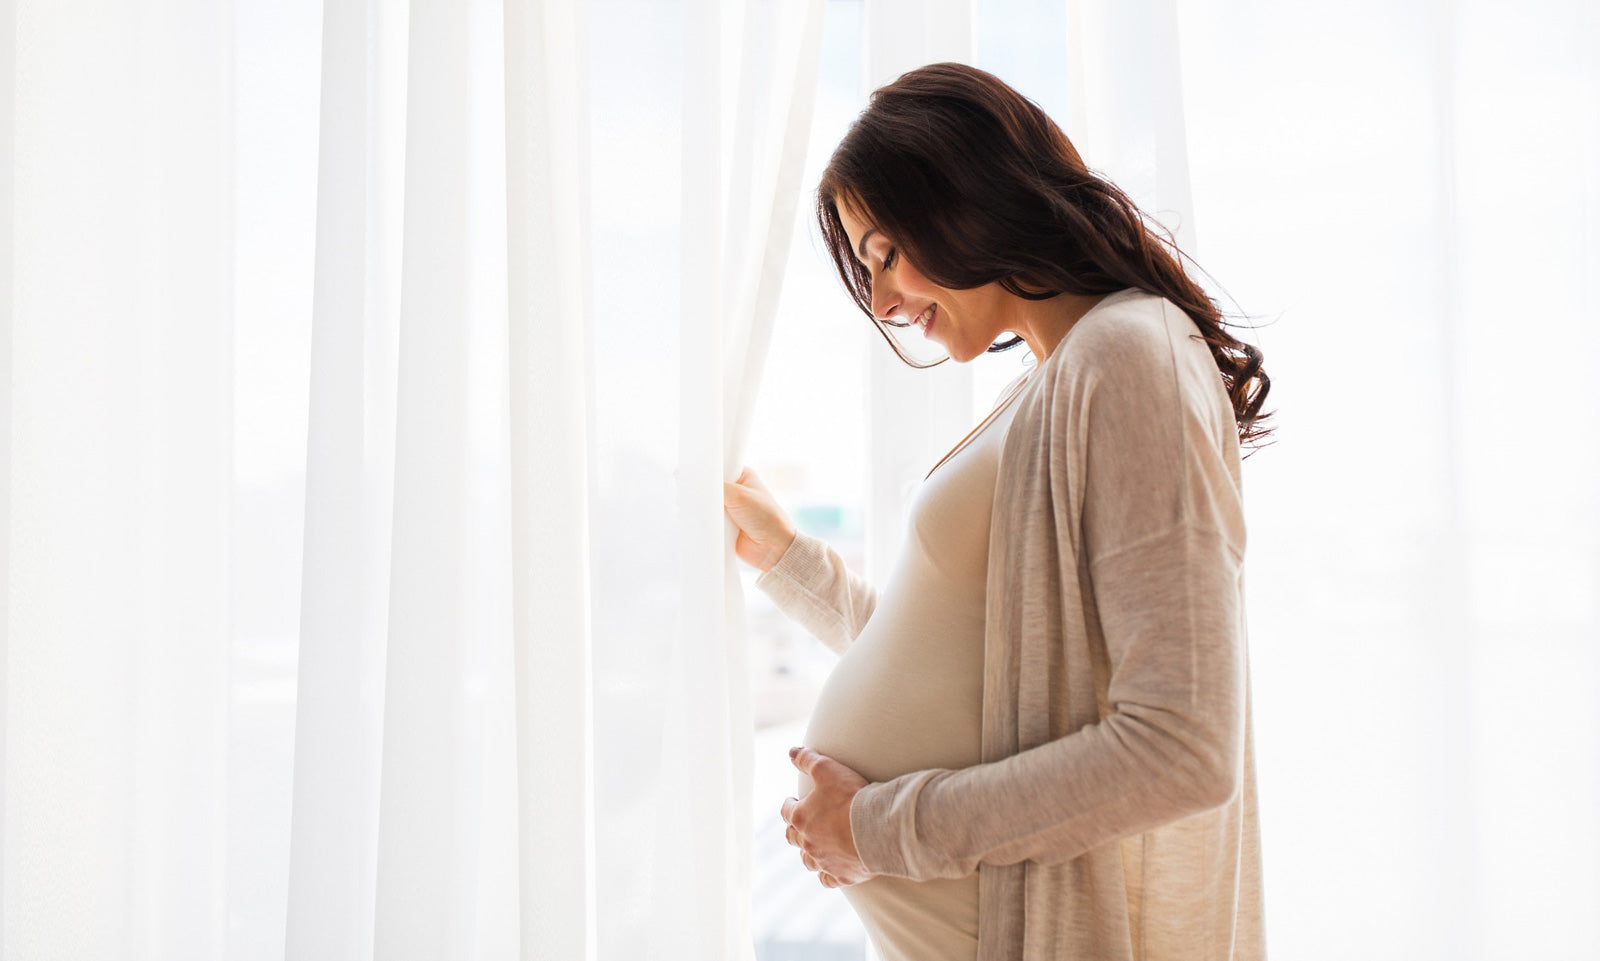 A pregnant woman stands by a bright window with curtains